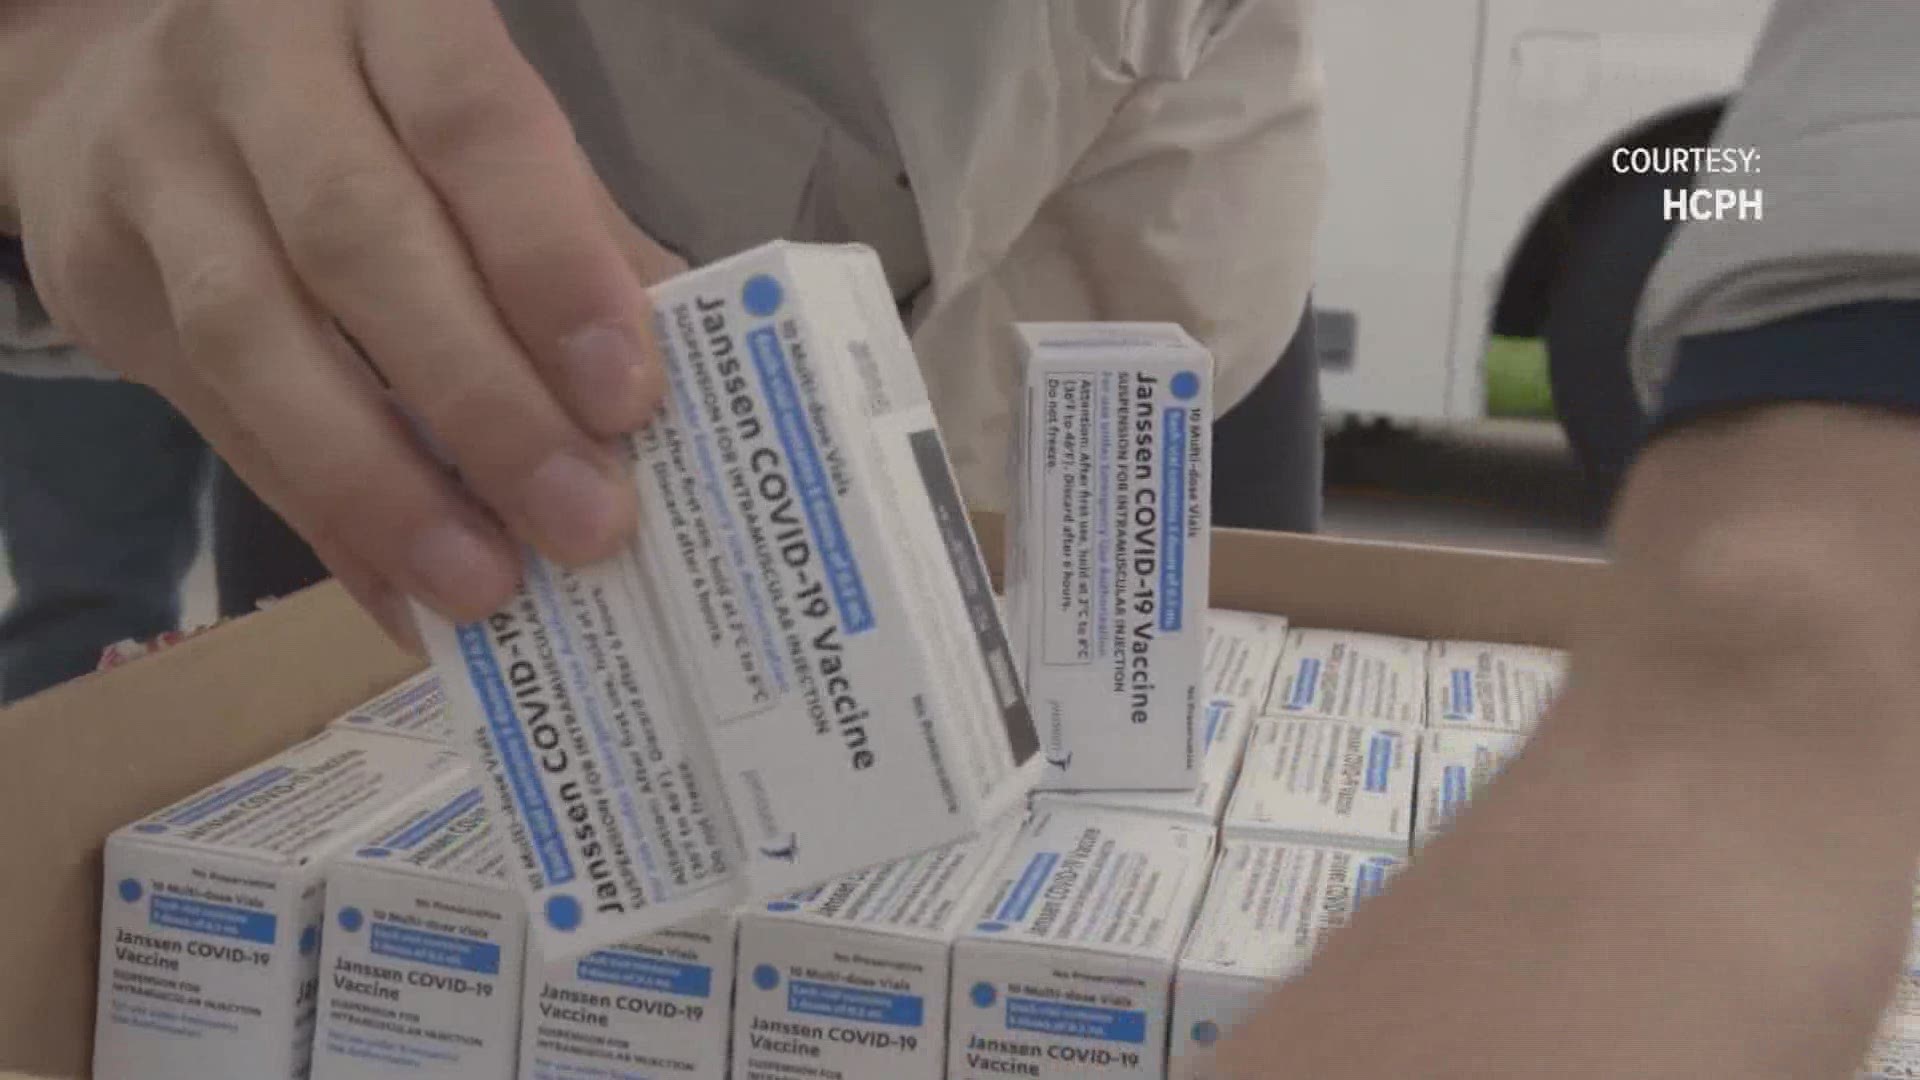 Harris County Public Health will administer its 6,000 doses of the new Johnson & Johnson vaccine on Monday at four of their mobile vaccination sites.